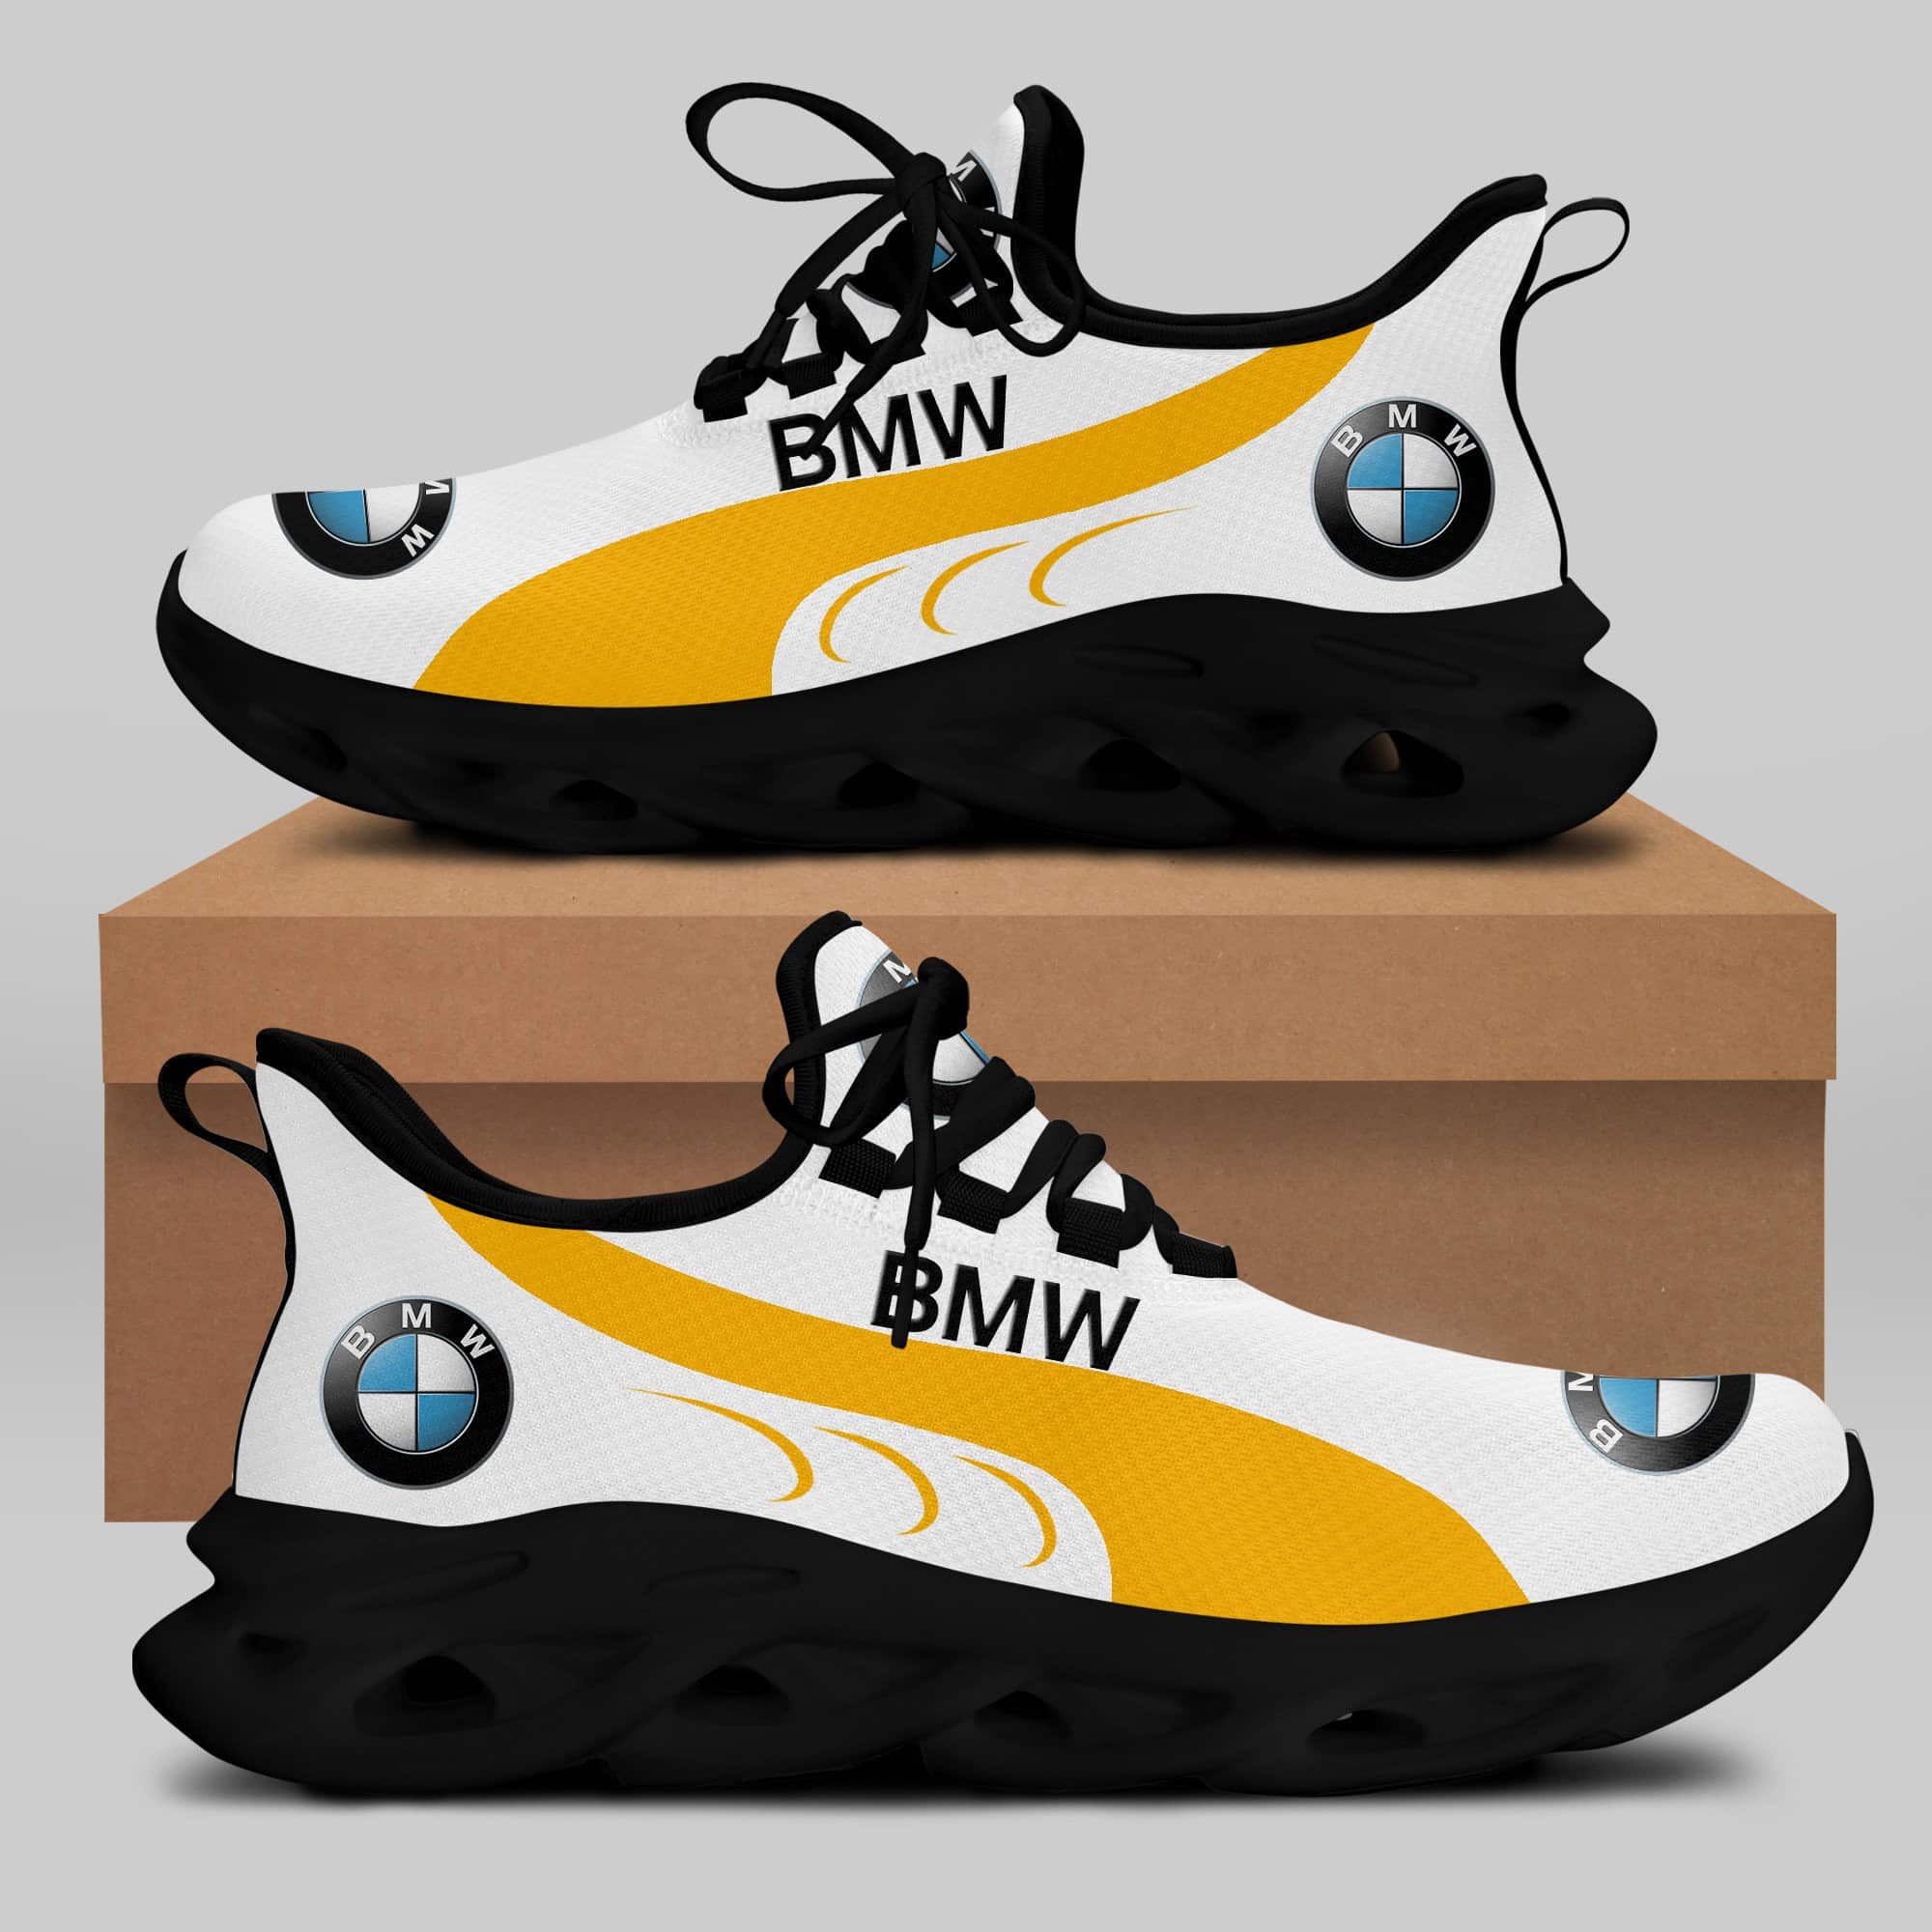 Bmw Running Shoes Max Soul Shoes Sneakers Ver 56 2